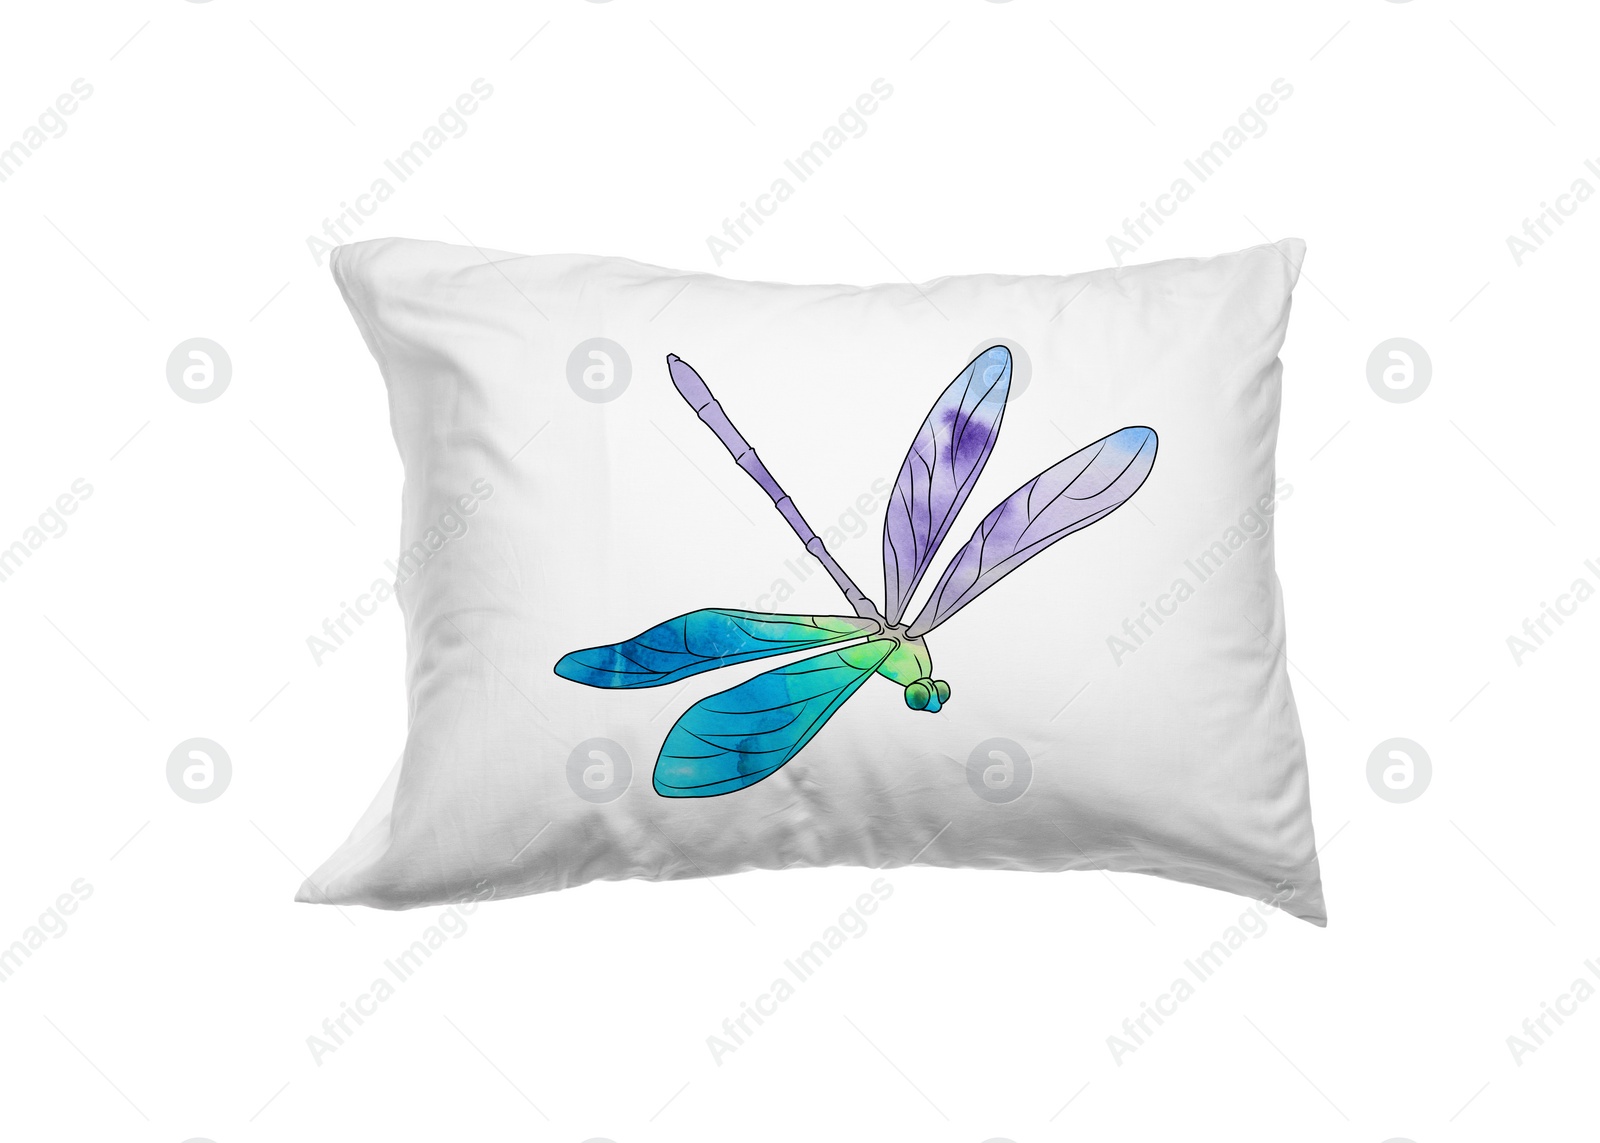 Image of Soft pillow with printed dragonfly isolated on white